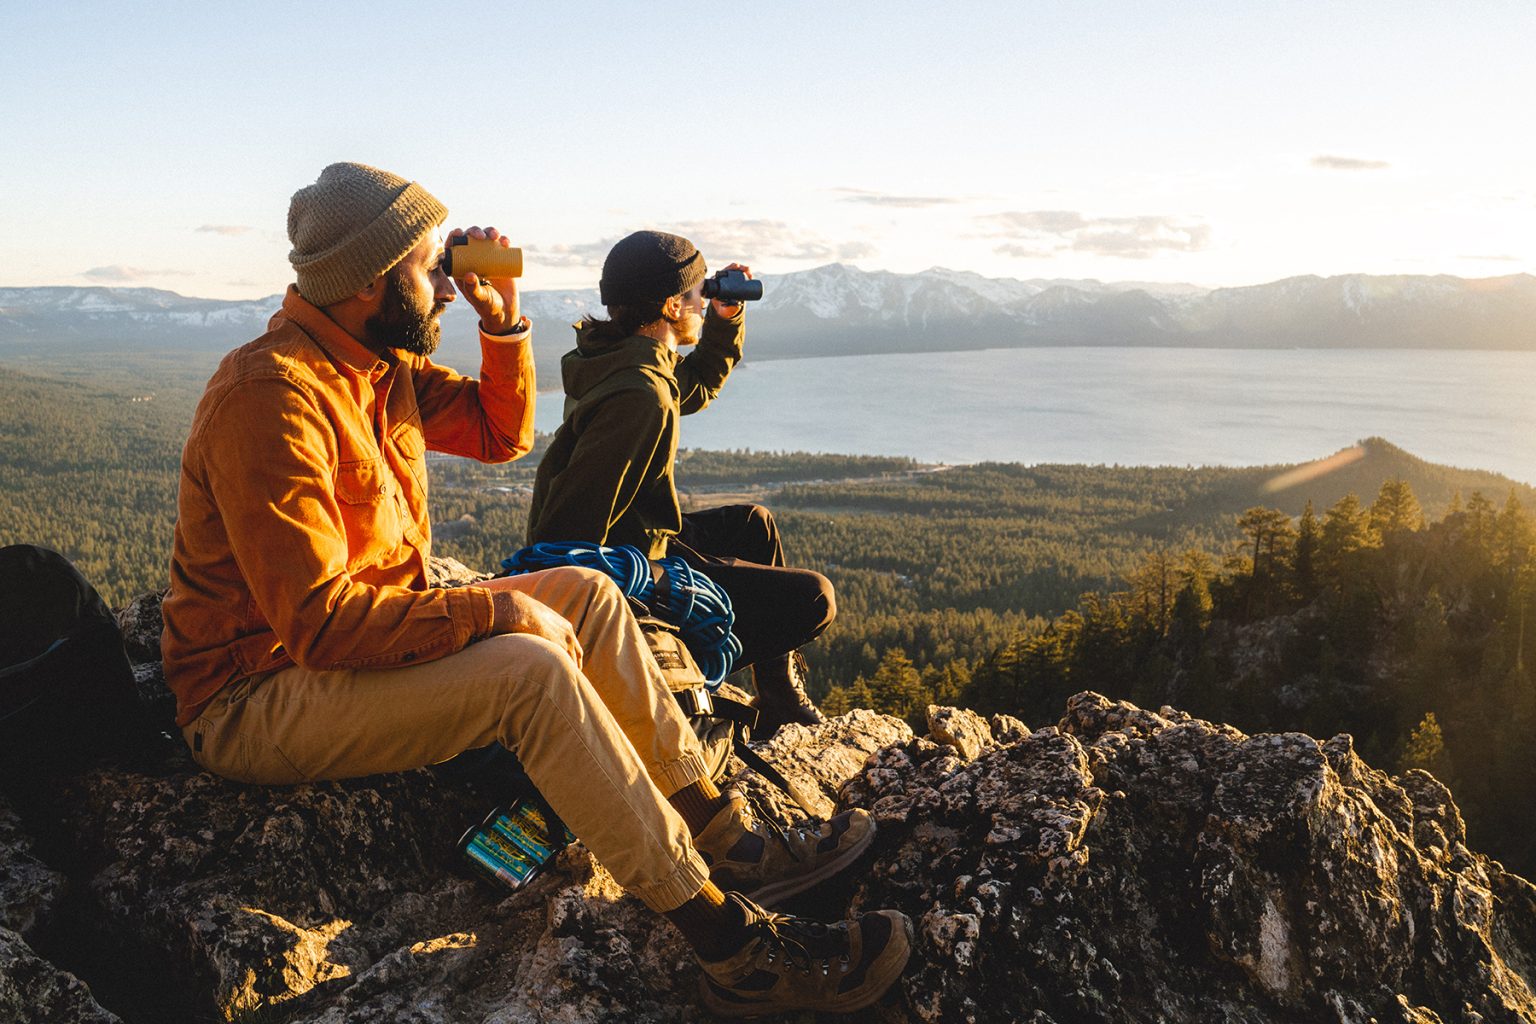 Two men at a scenic overlook using a Nocs monocle, a cool gift for outdoor lovers